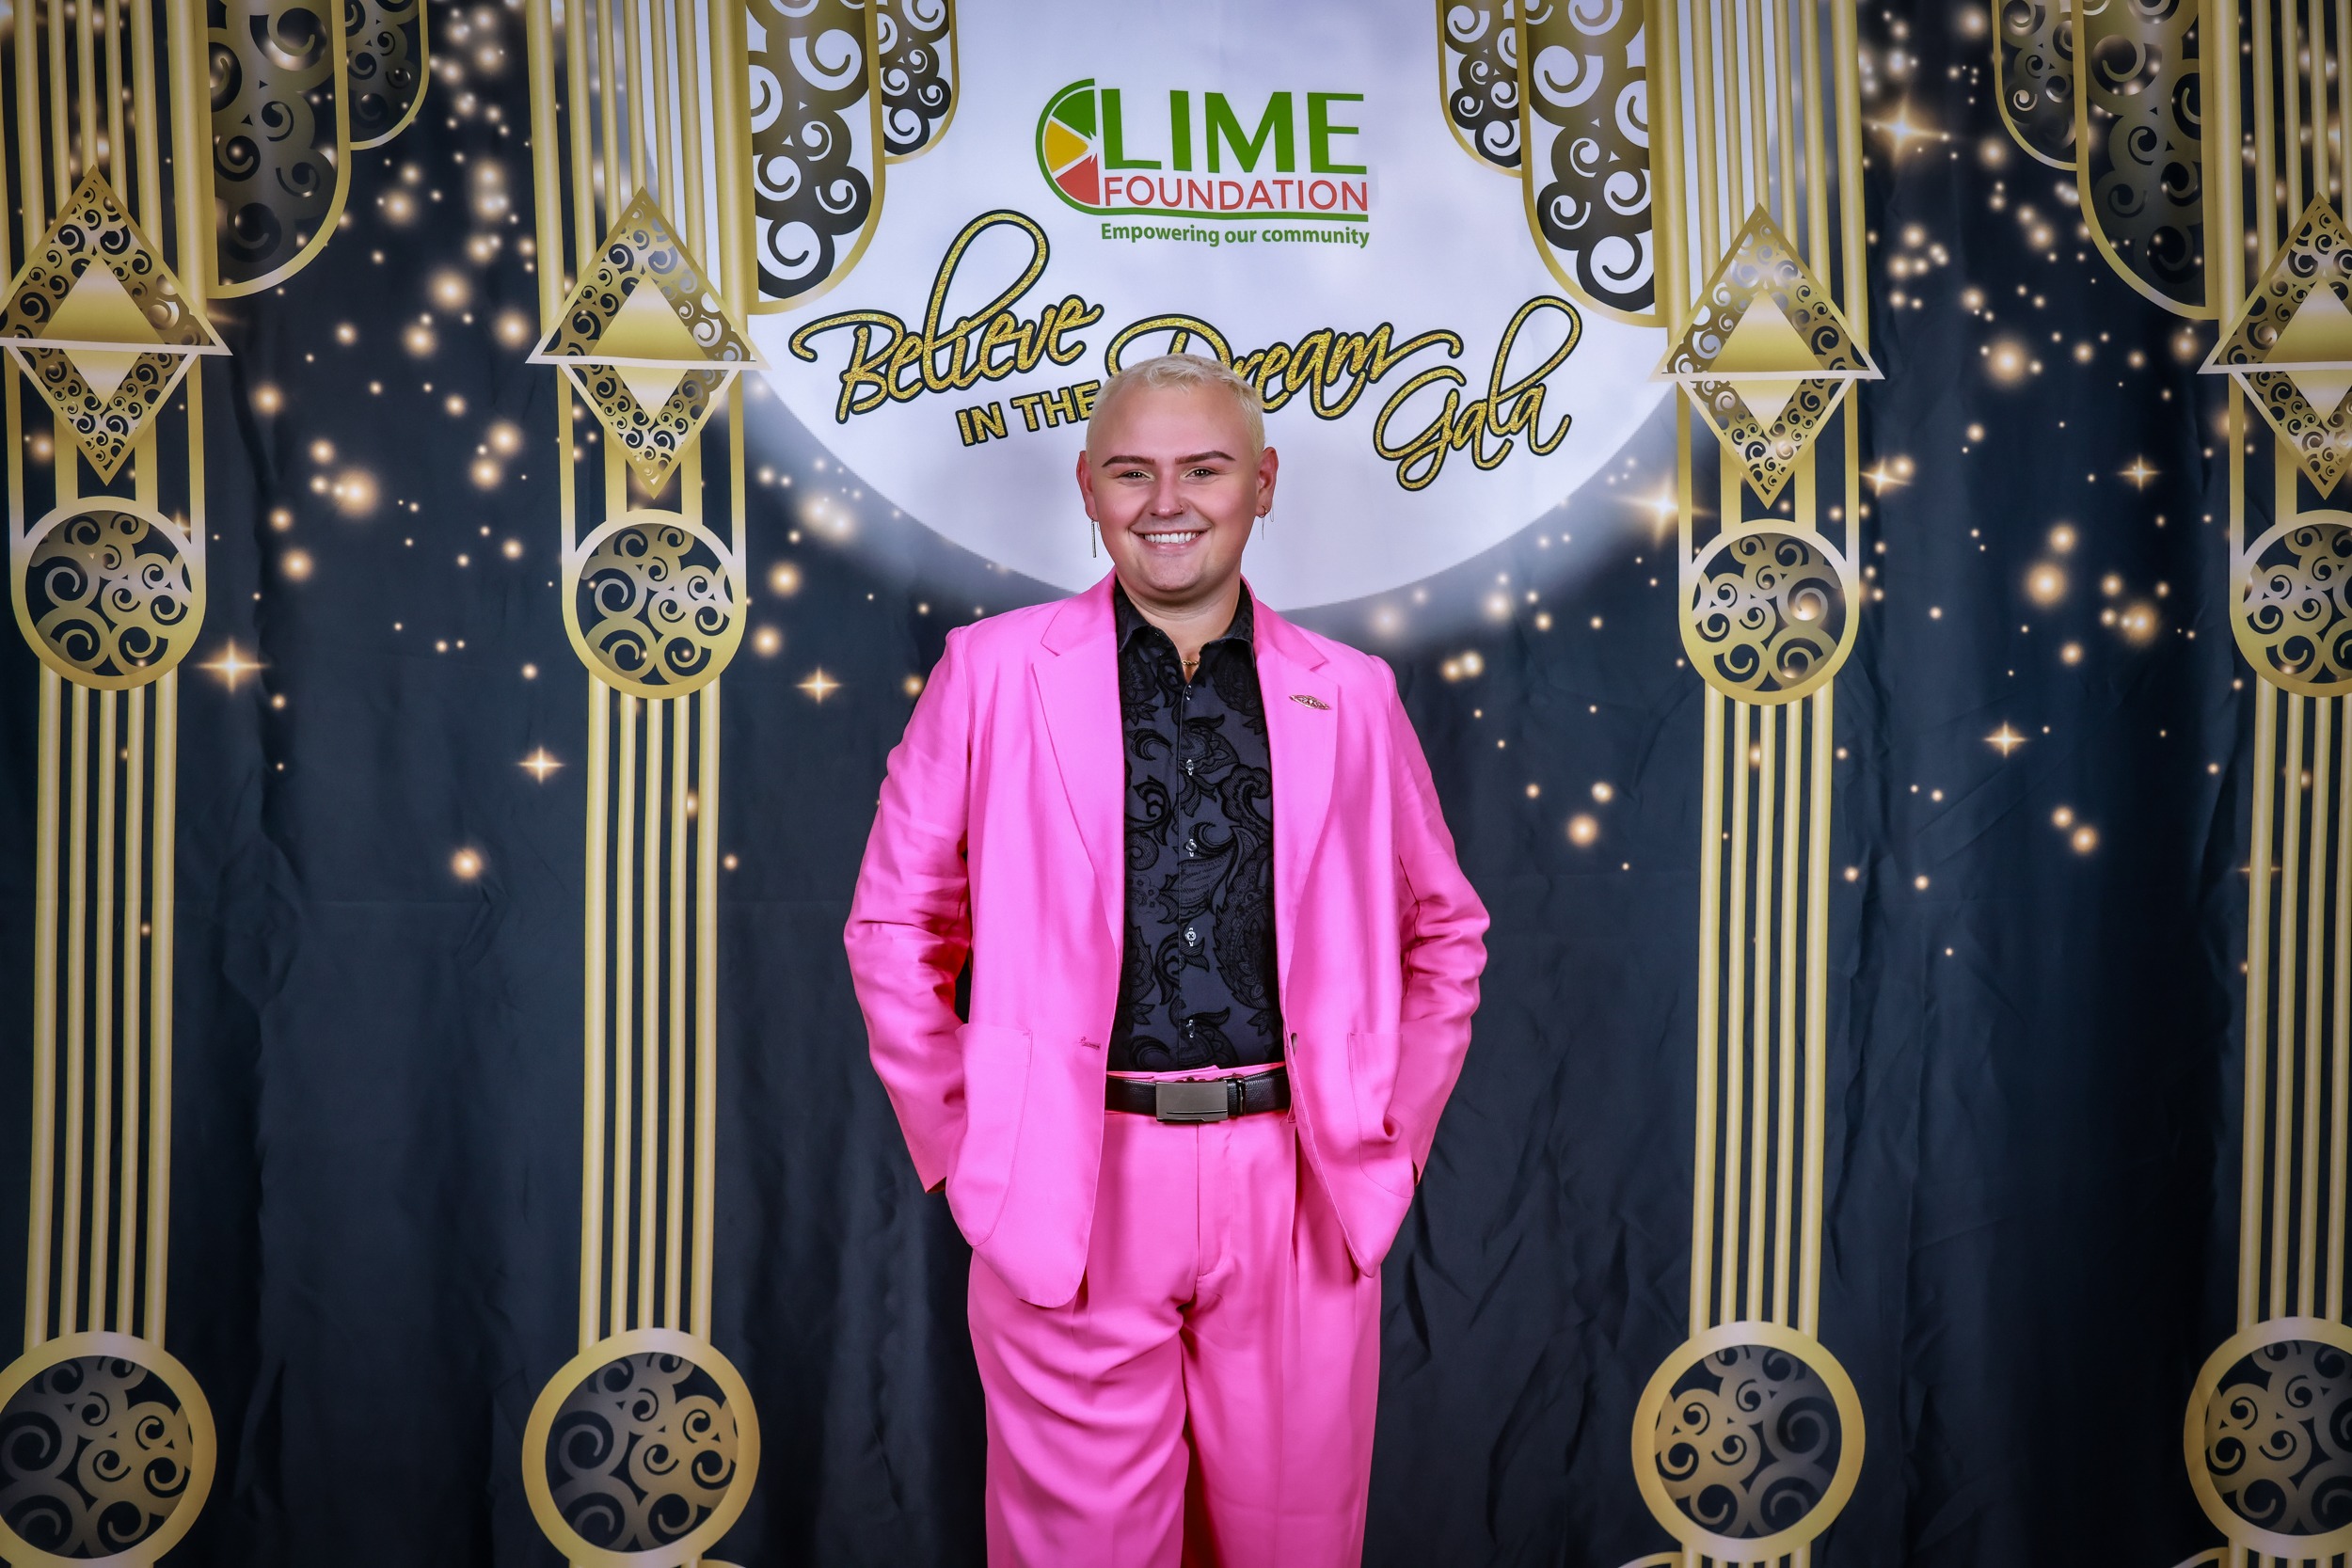 A man in a pink suit stands in front of a gold backdrop at the LIME Foundation, a Sonoma County non-profit organization.